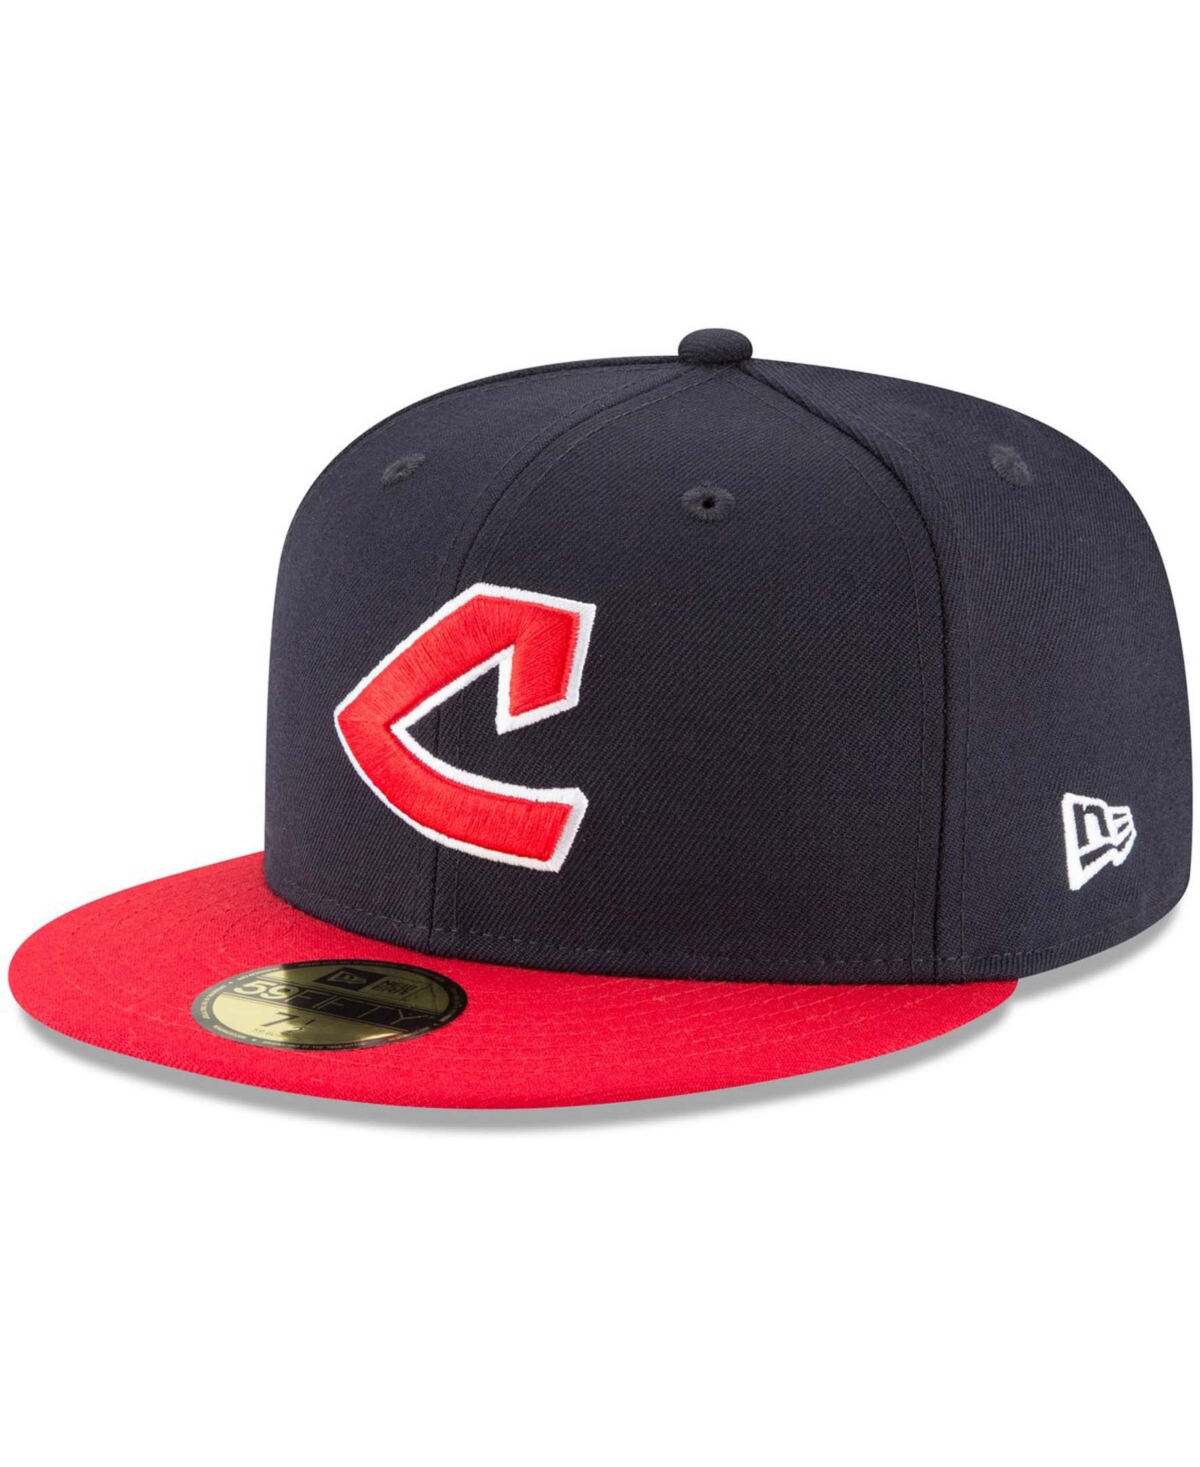 Men's Navy Cleveland Indians Cooperstown Collection Wool 59FIFTY Fitted Hat - Navy